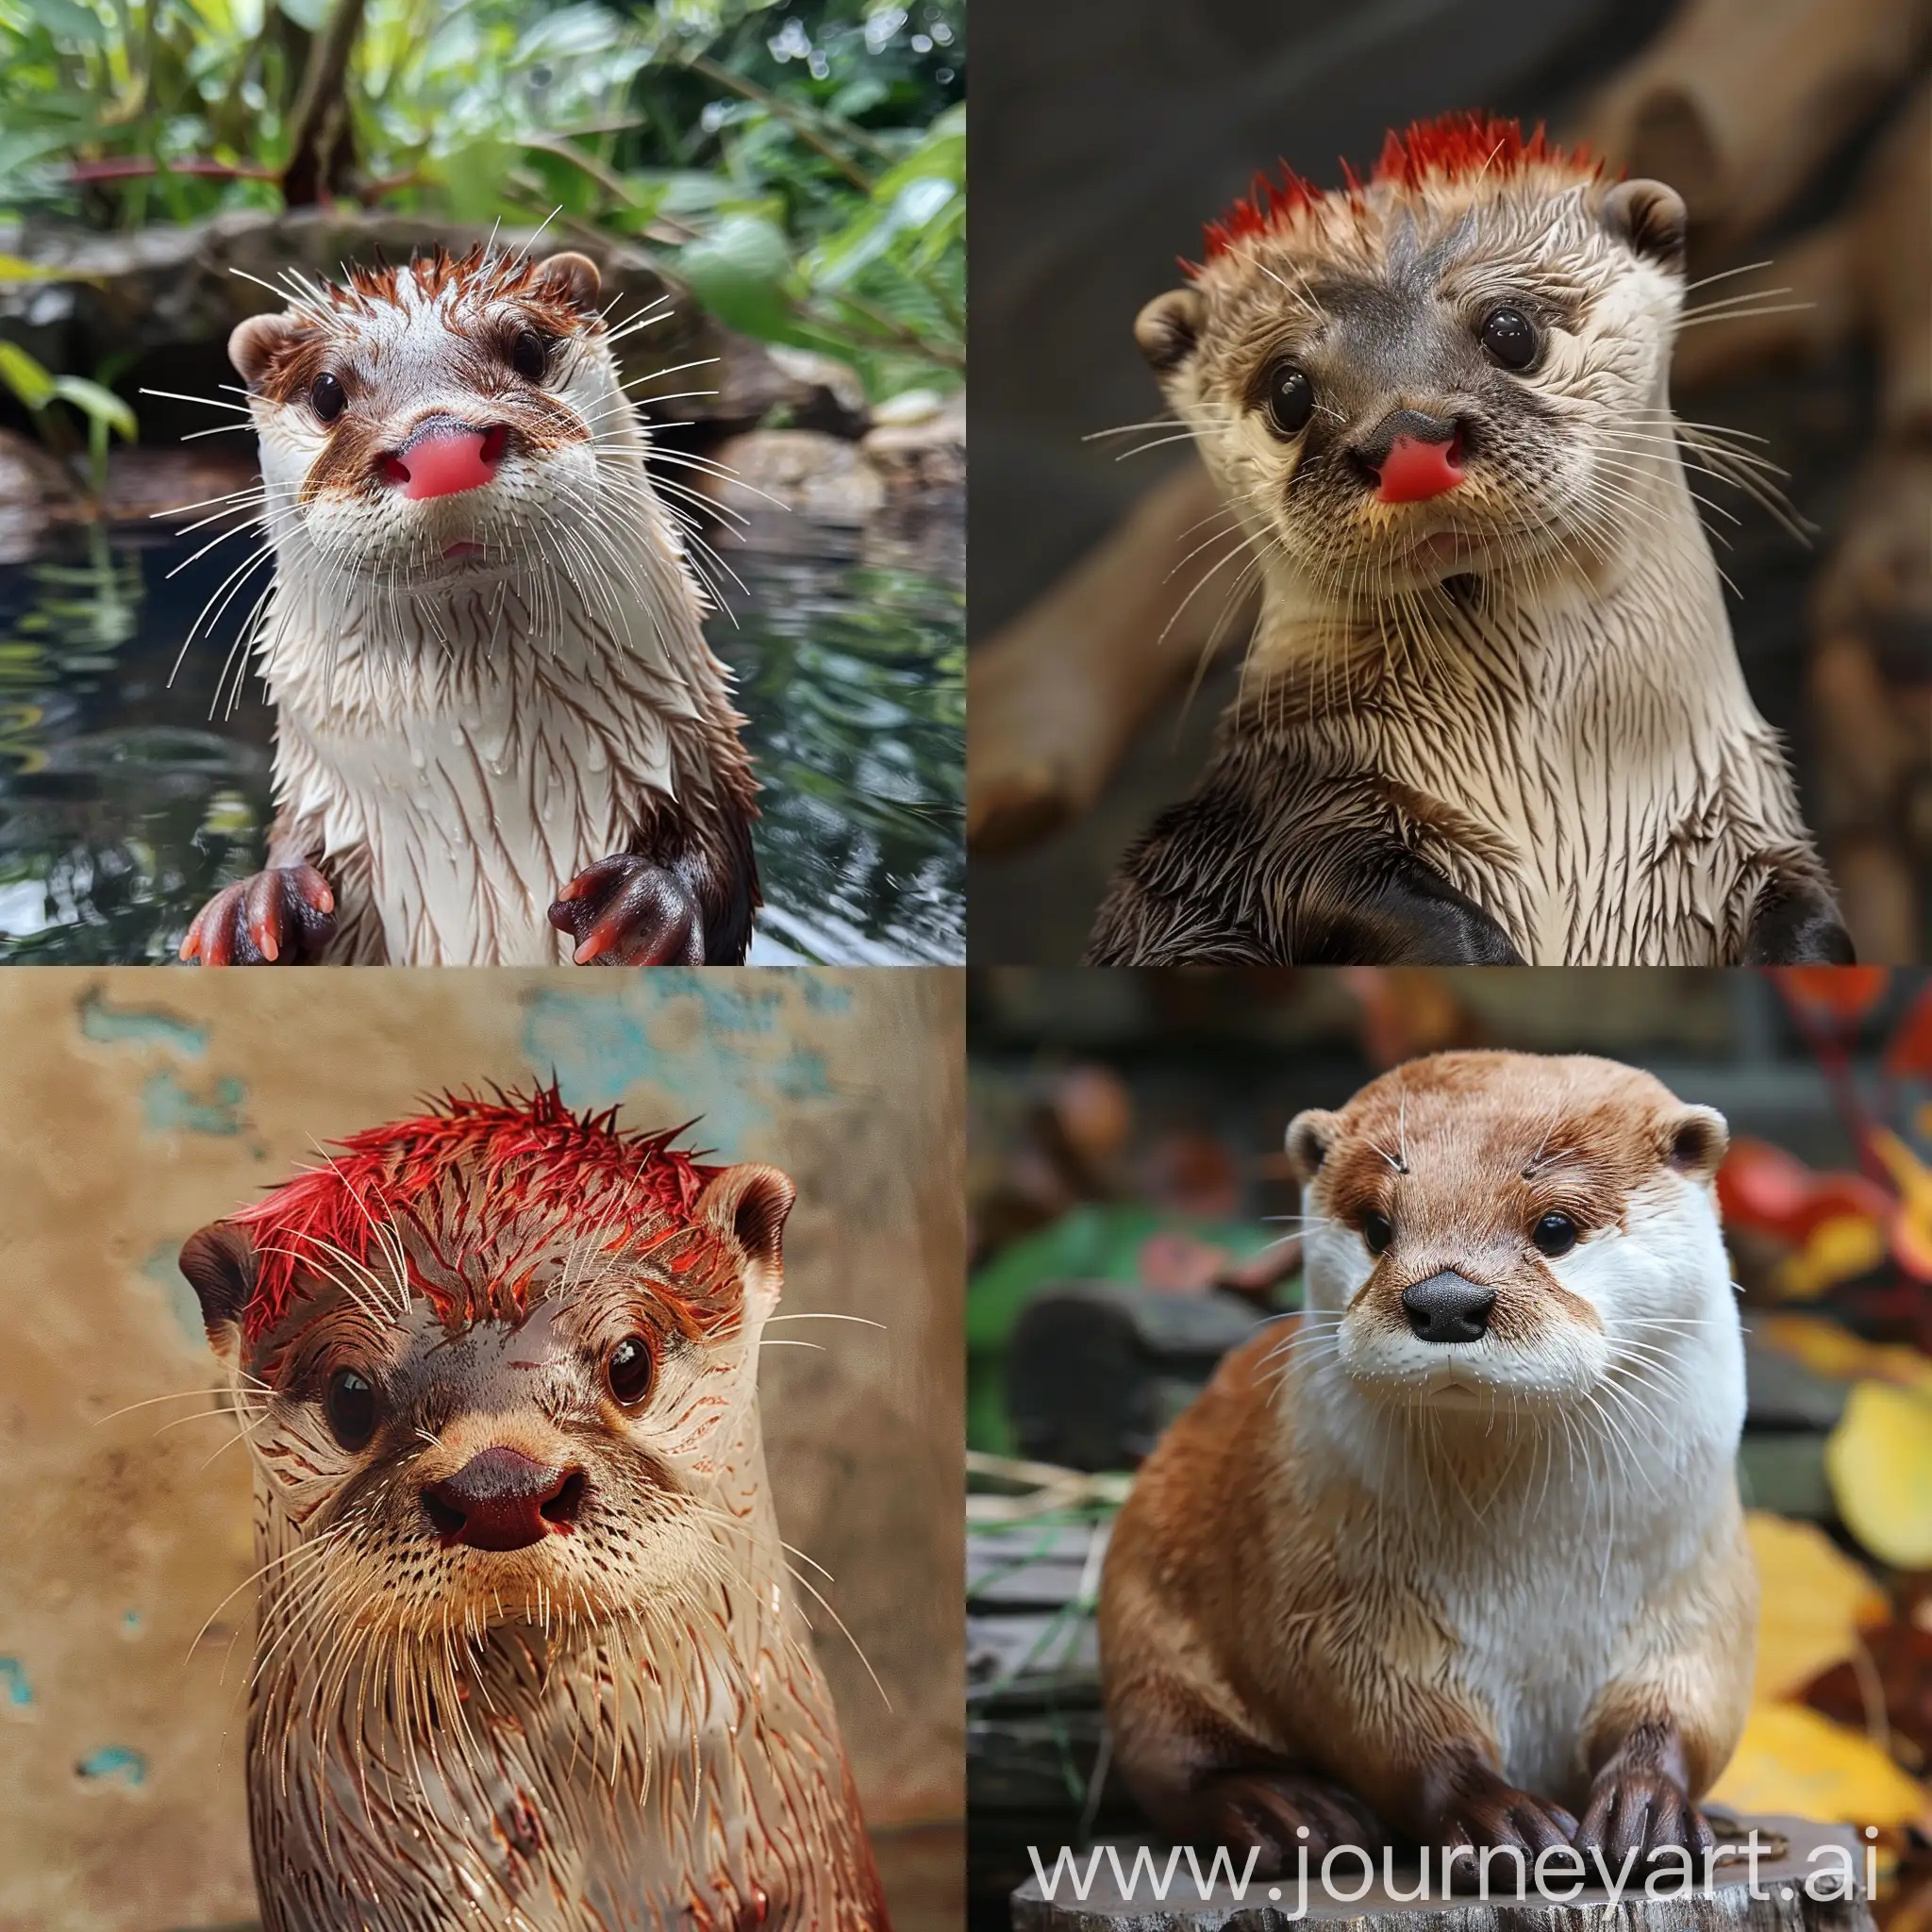 Playful-RedHaired-Otter-with-White-Coloration